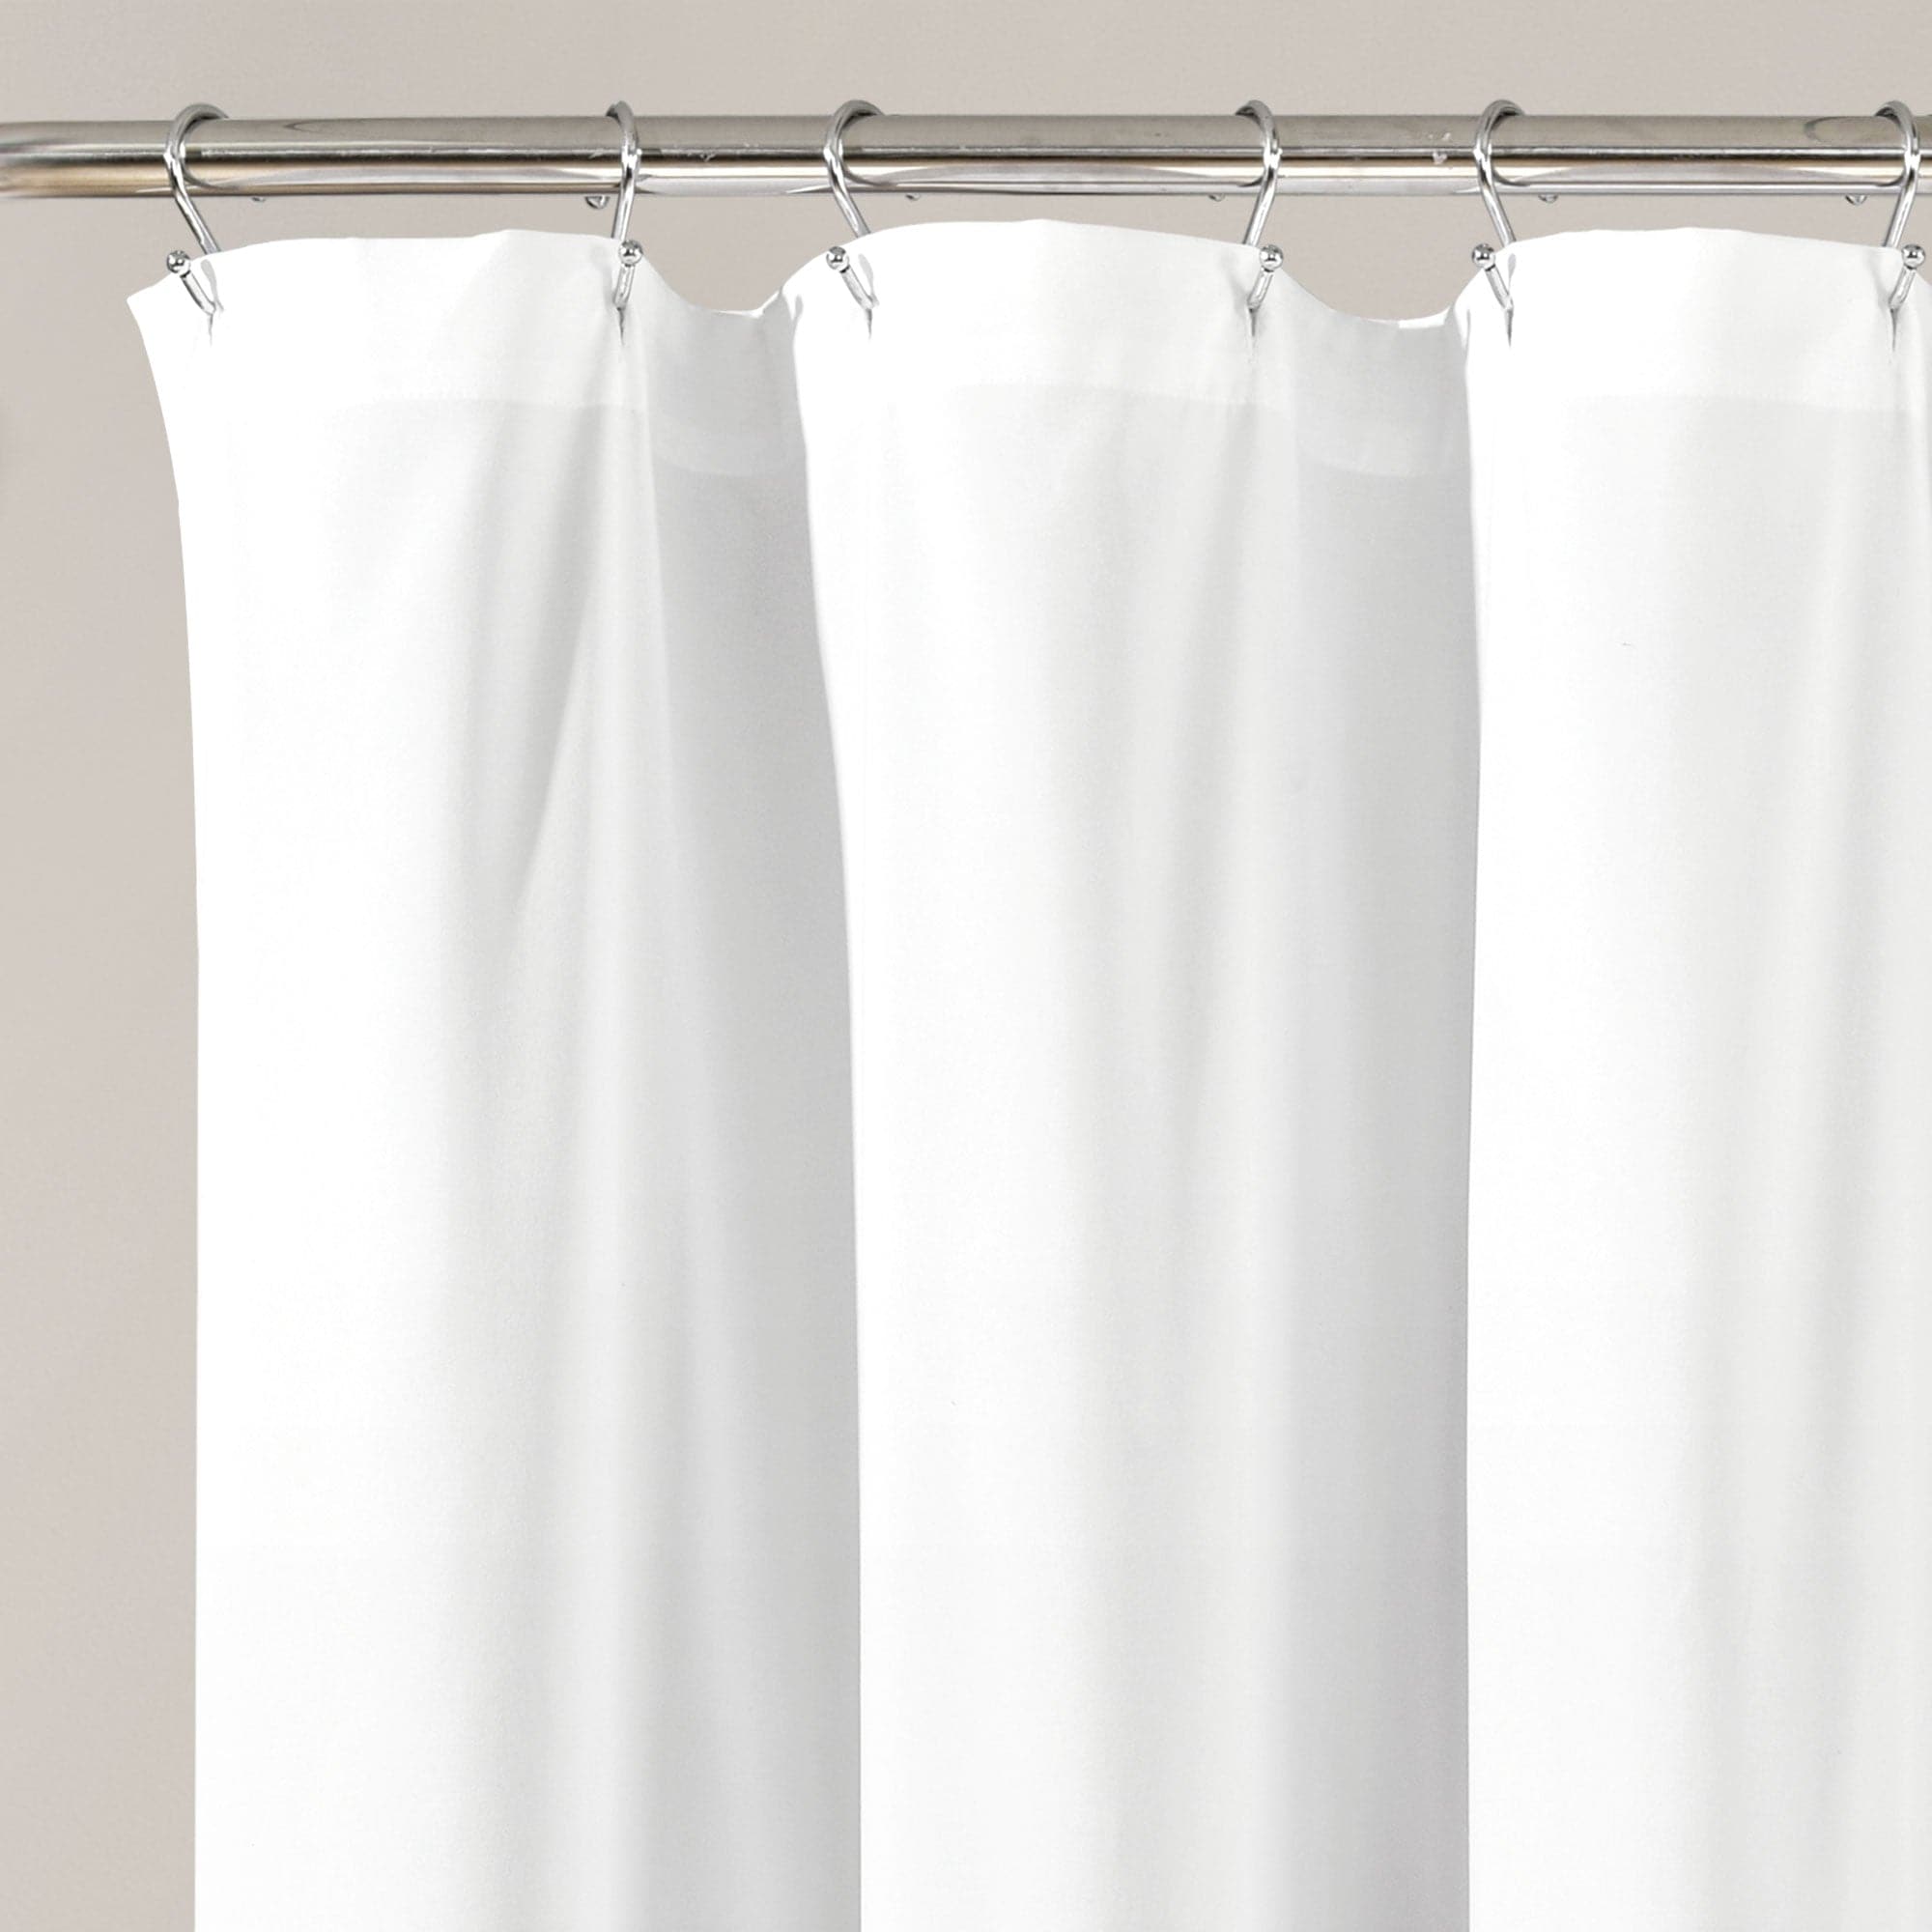 grey and white shower curtain long